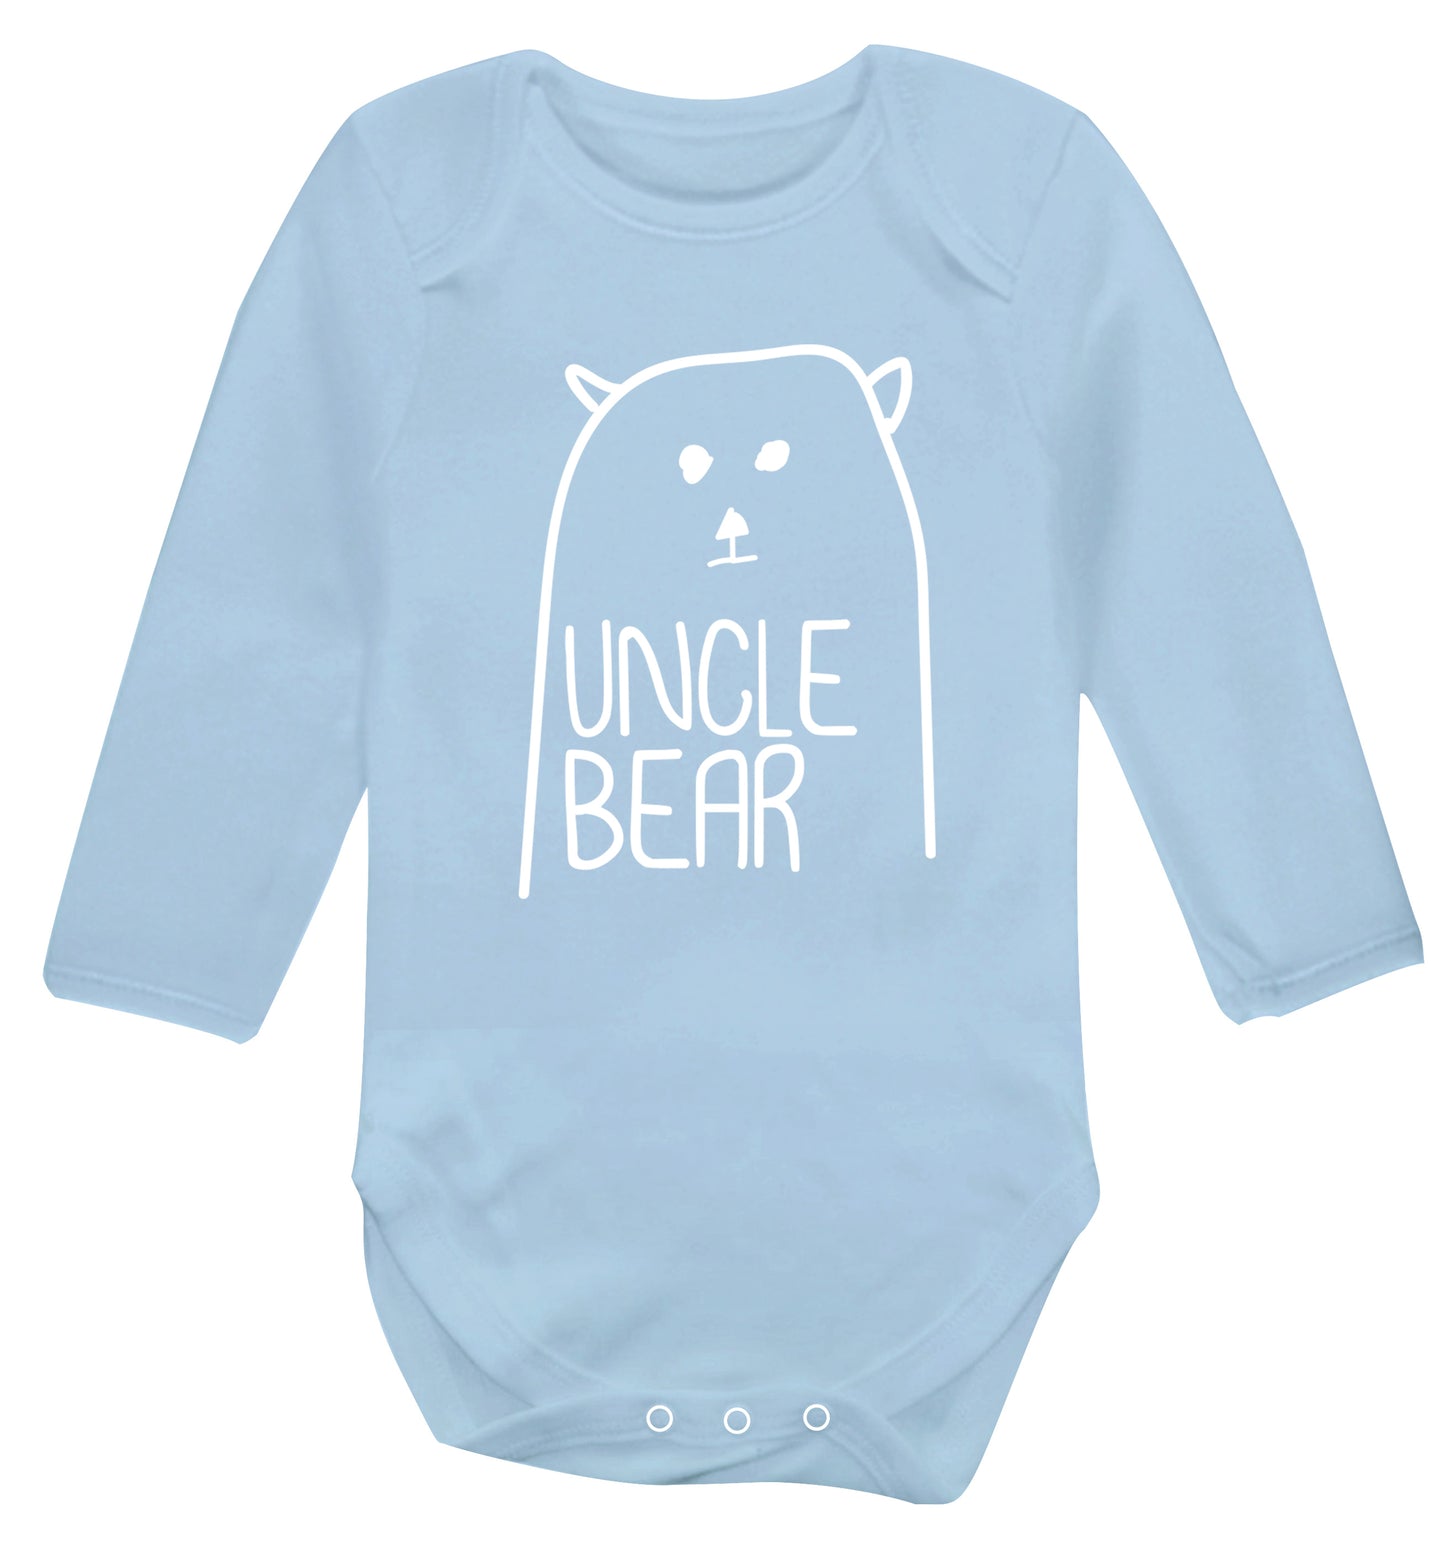 Uncle bear Baby Vest long sleeved pale blue 6-12 months